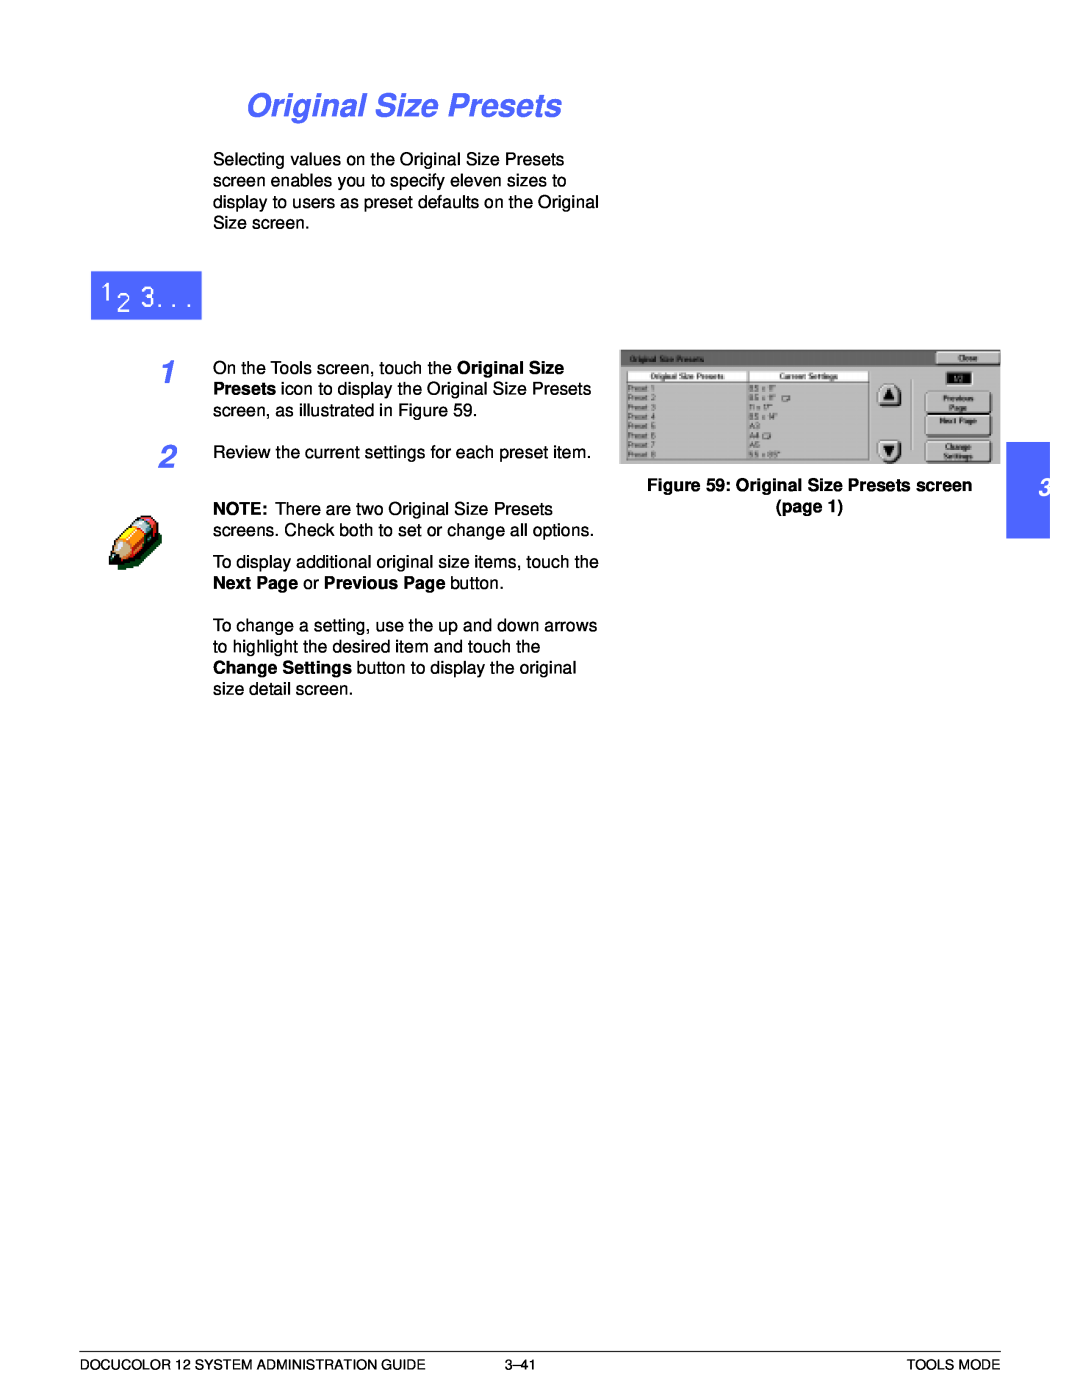 Xerox a2 manual 2 3 4 5 6 7, Next Page or Previous Page button, Original Size Presets screen page 